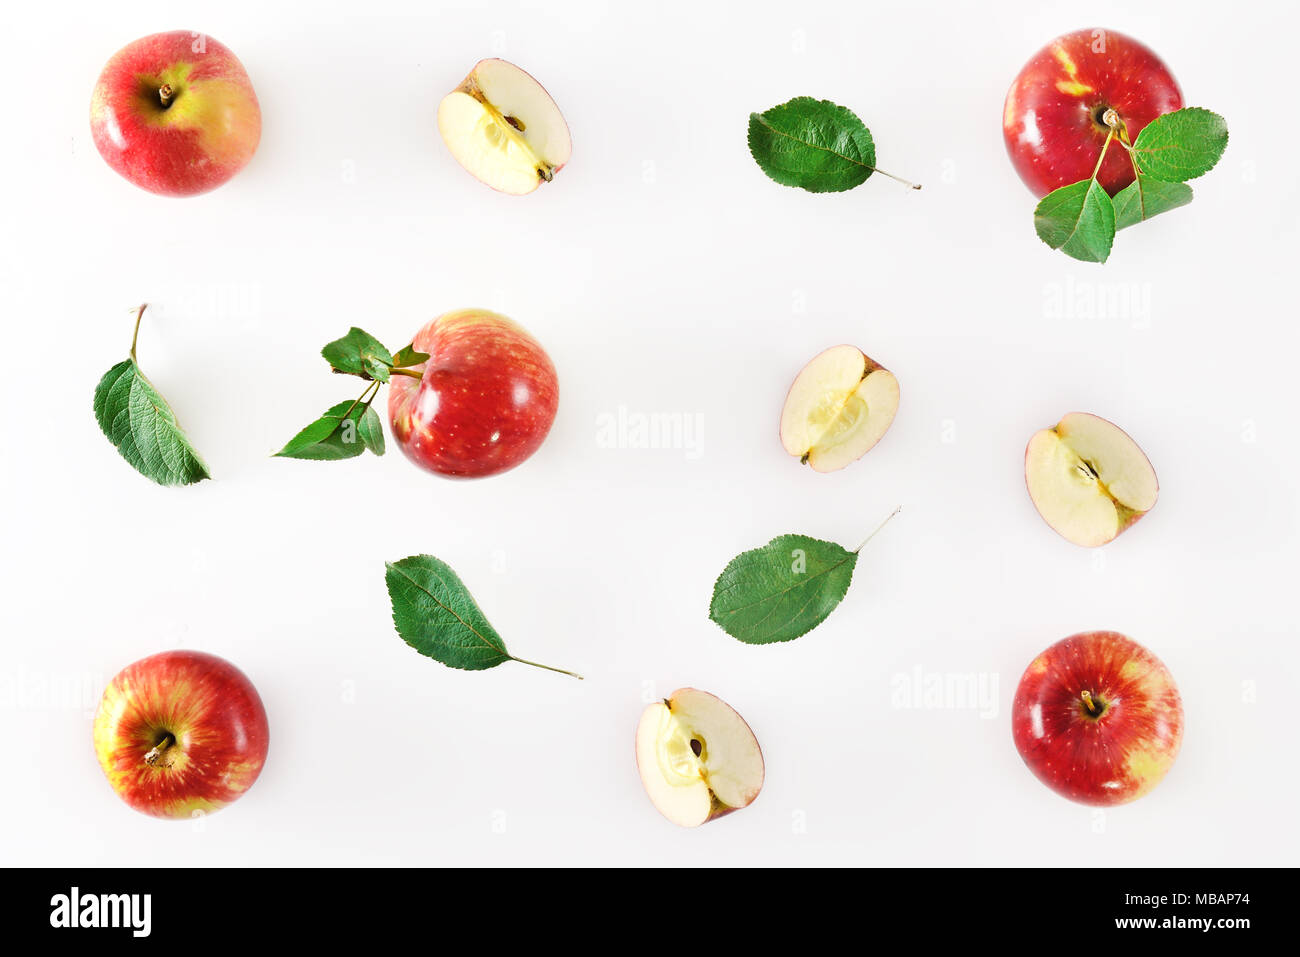 Red apple fruits on white background. Pattern with apples flat lay. Top view. Stock Photo